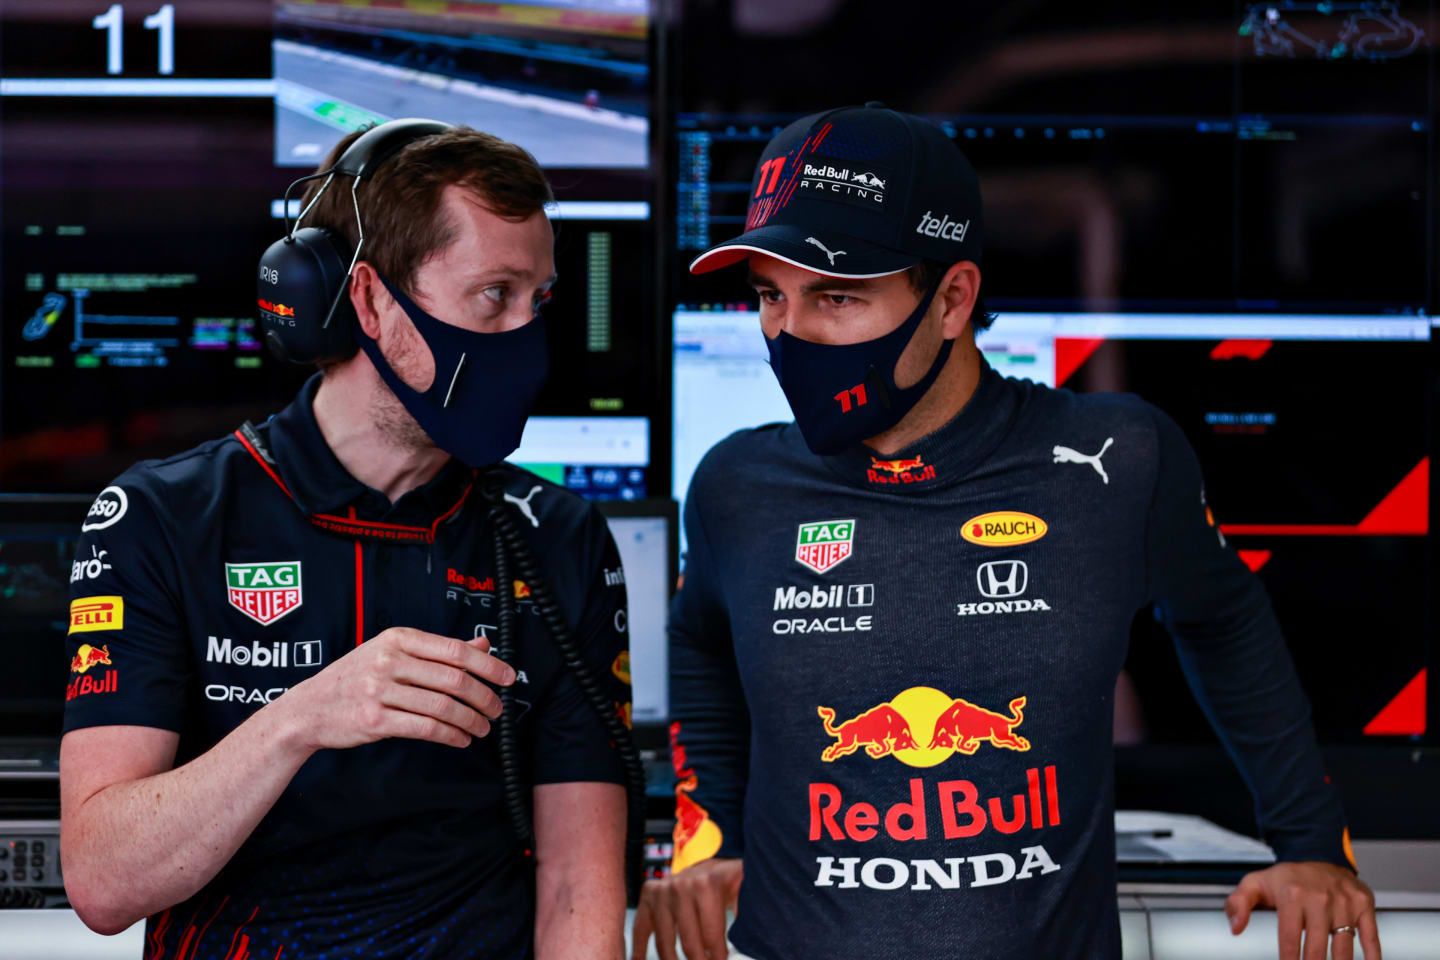 BARCELONA, SPAIN - MAY 08: Sergio Perez of Mexico and Red Bull Racing talks with an engineer in the garage during qualifying for the F1 Grand Prix of Spain at Circuit de Barcelona-Catalunya on May 08, 2021 in Barcelona, Spain. (Photo by Mark Thompson/Getty Images)